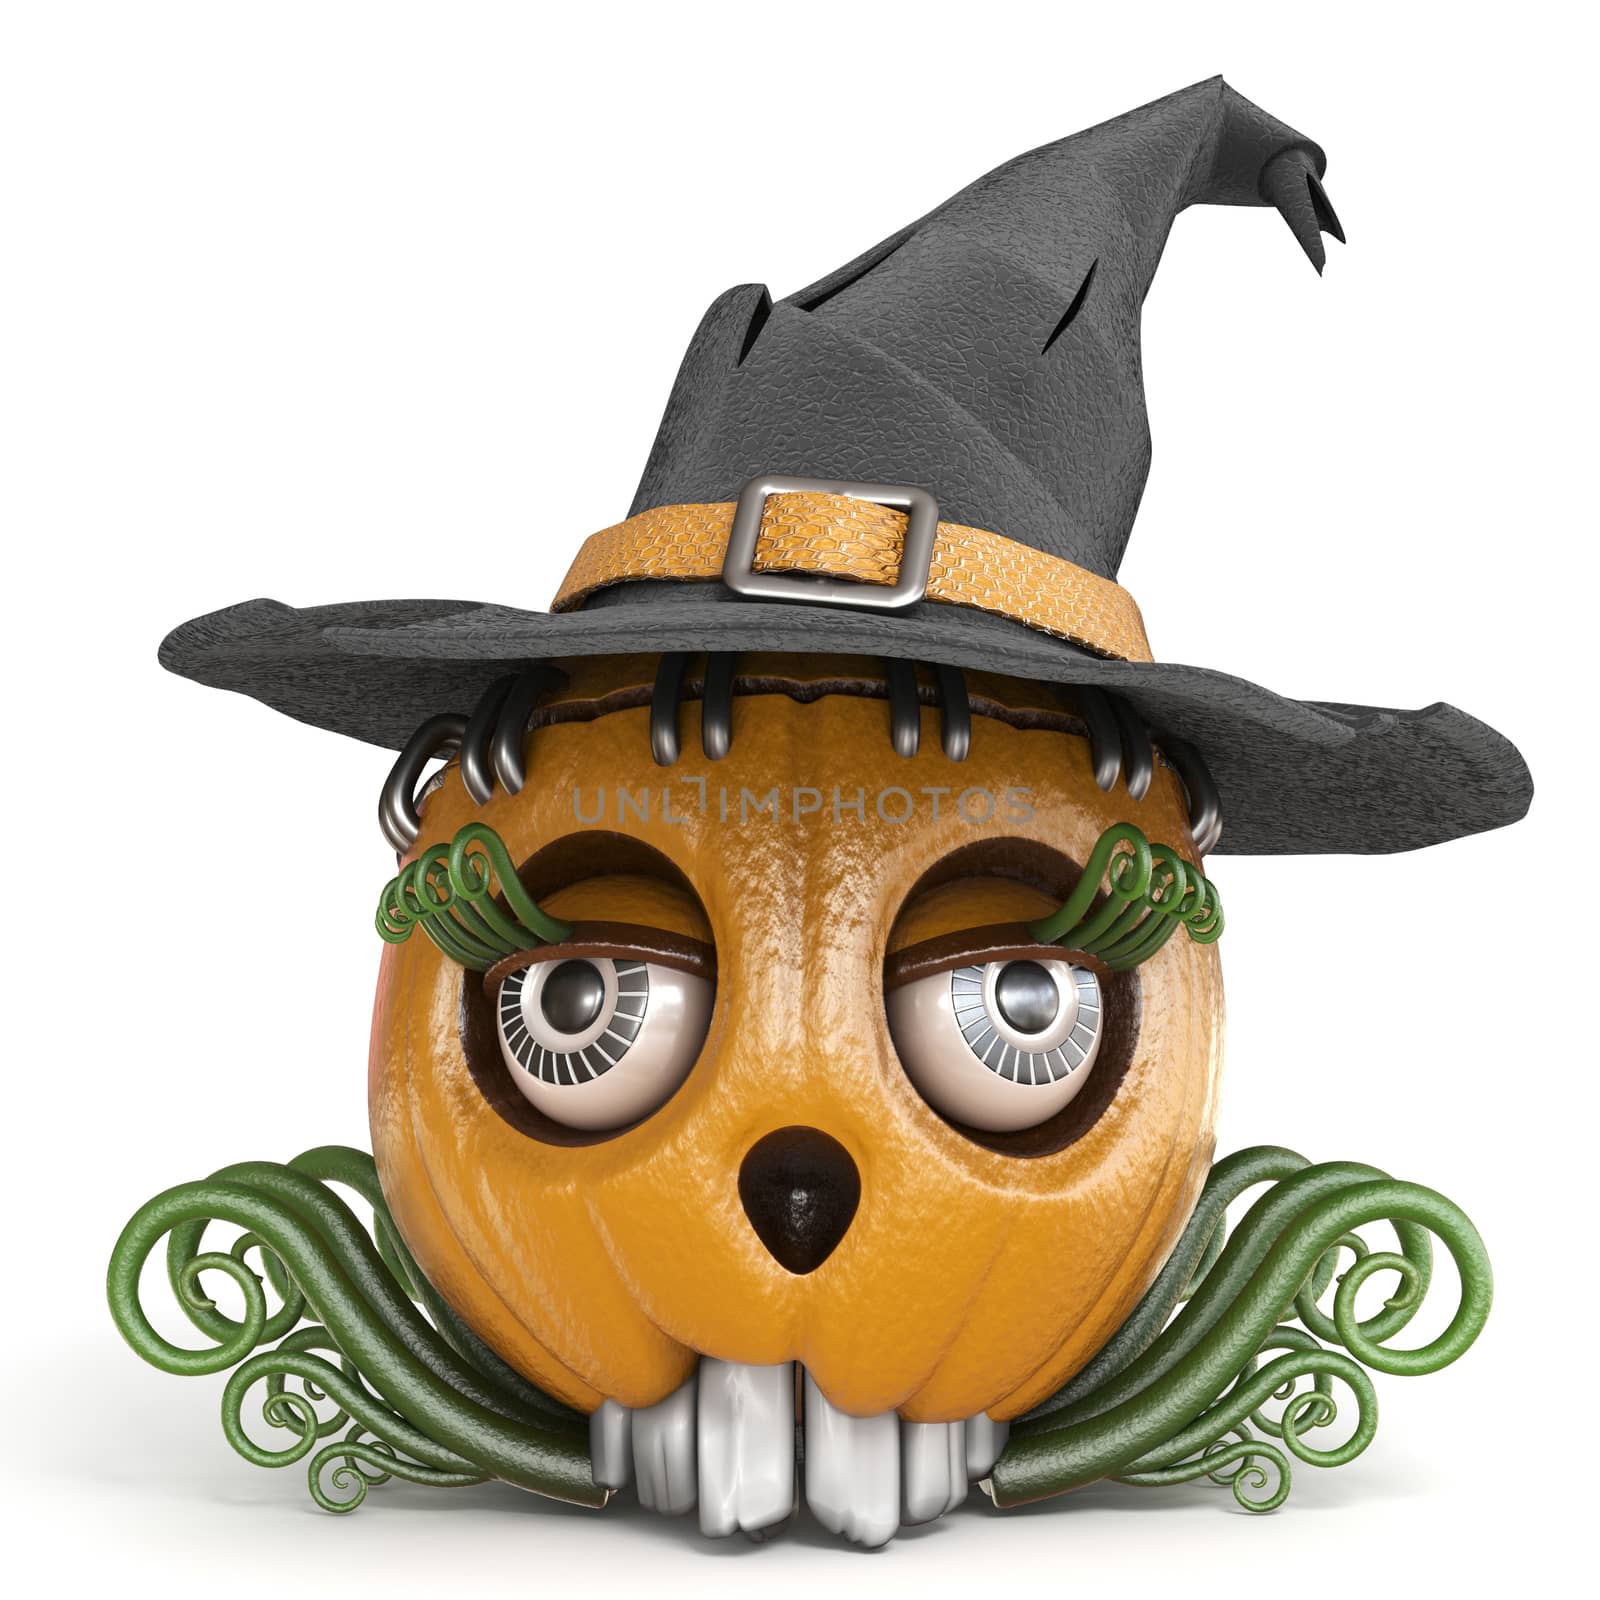 Halloween pumpkin Jack O Lantern lady with witch hat 3D render illustration isolated on white background